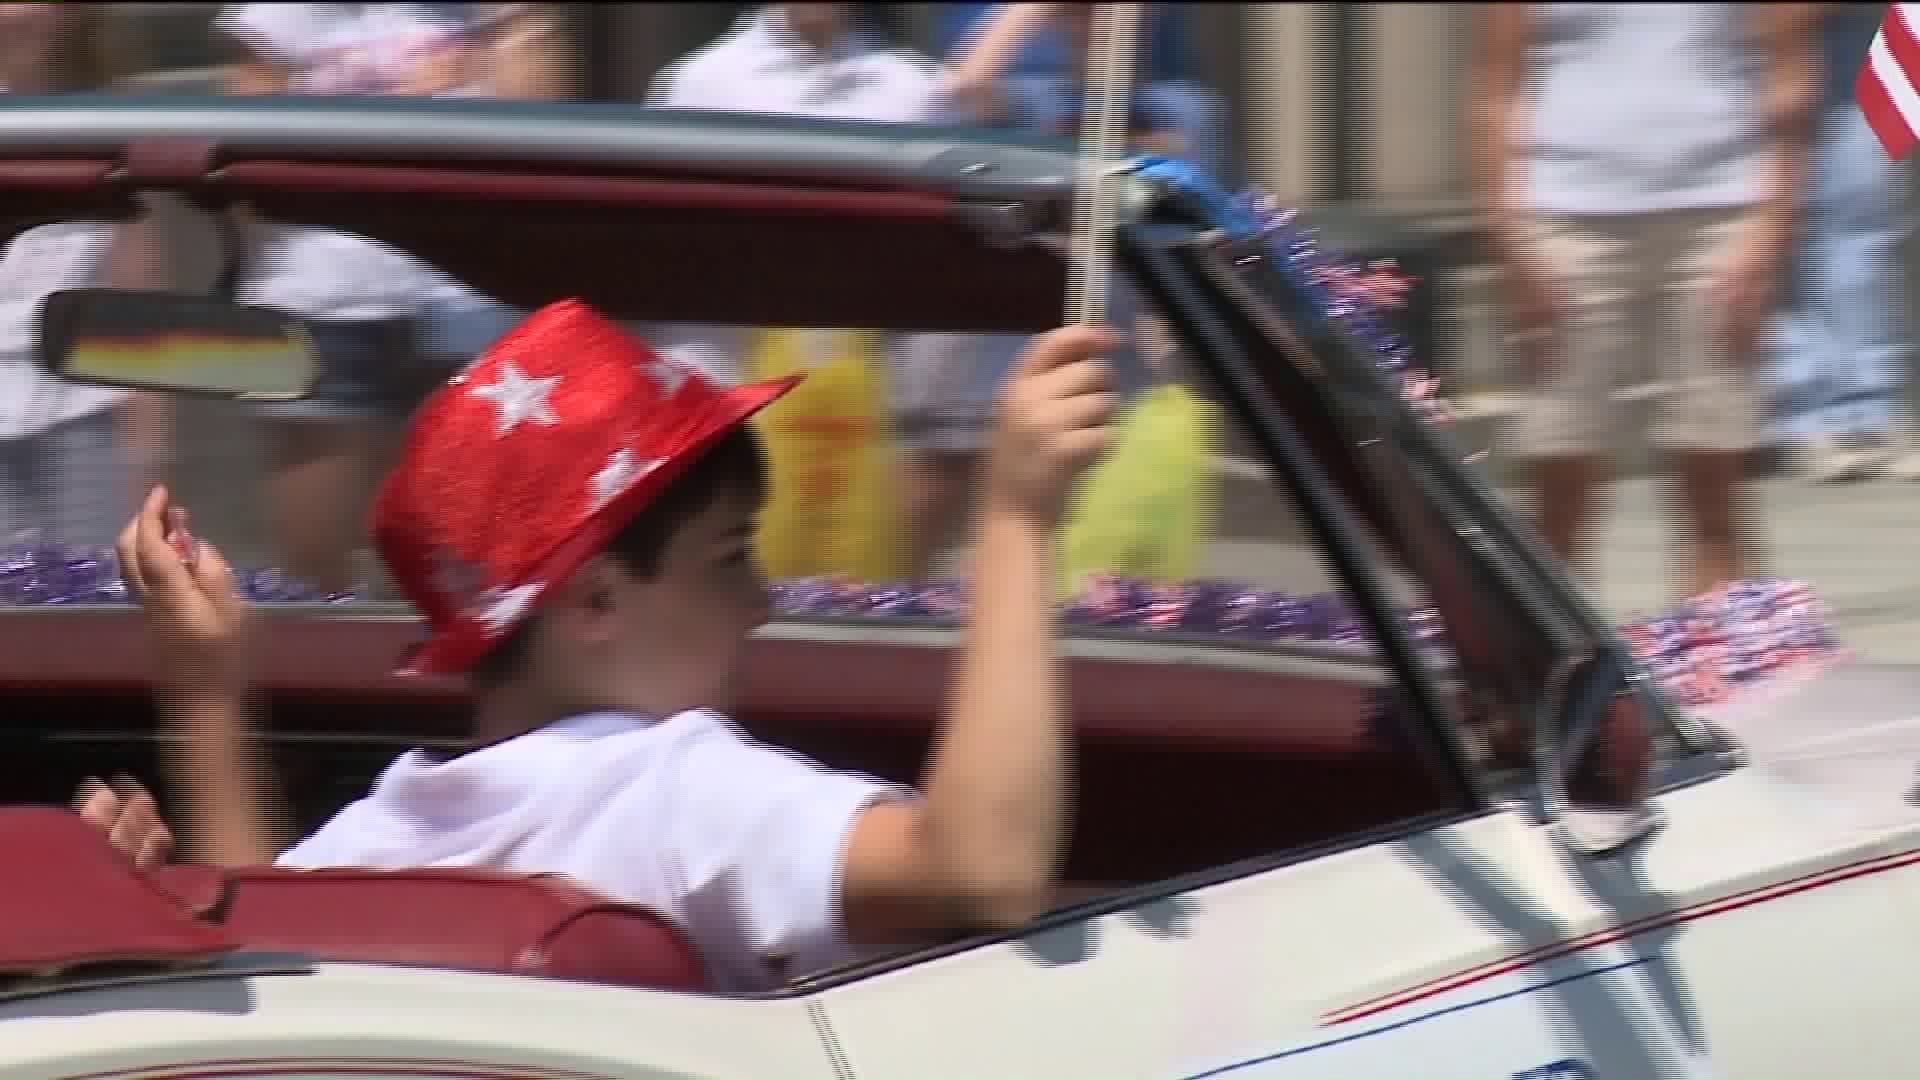 10 Year Old in Need of Kidney Is Grand Marshal of Hawley Fourth of July Parade